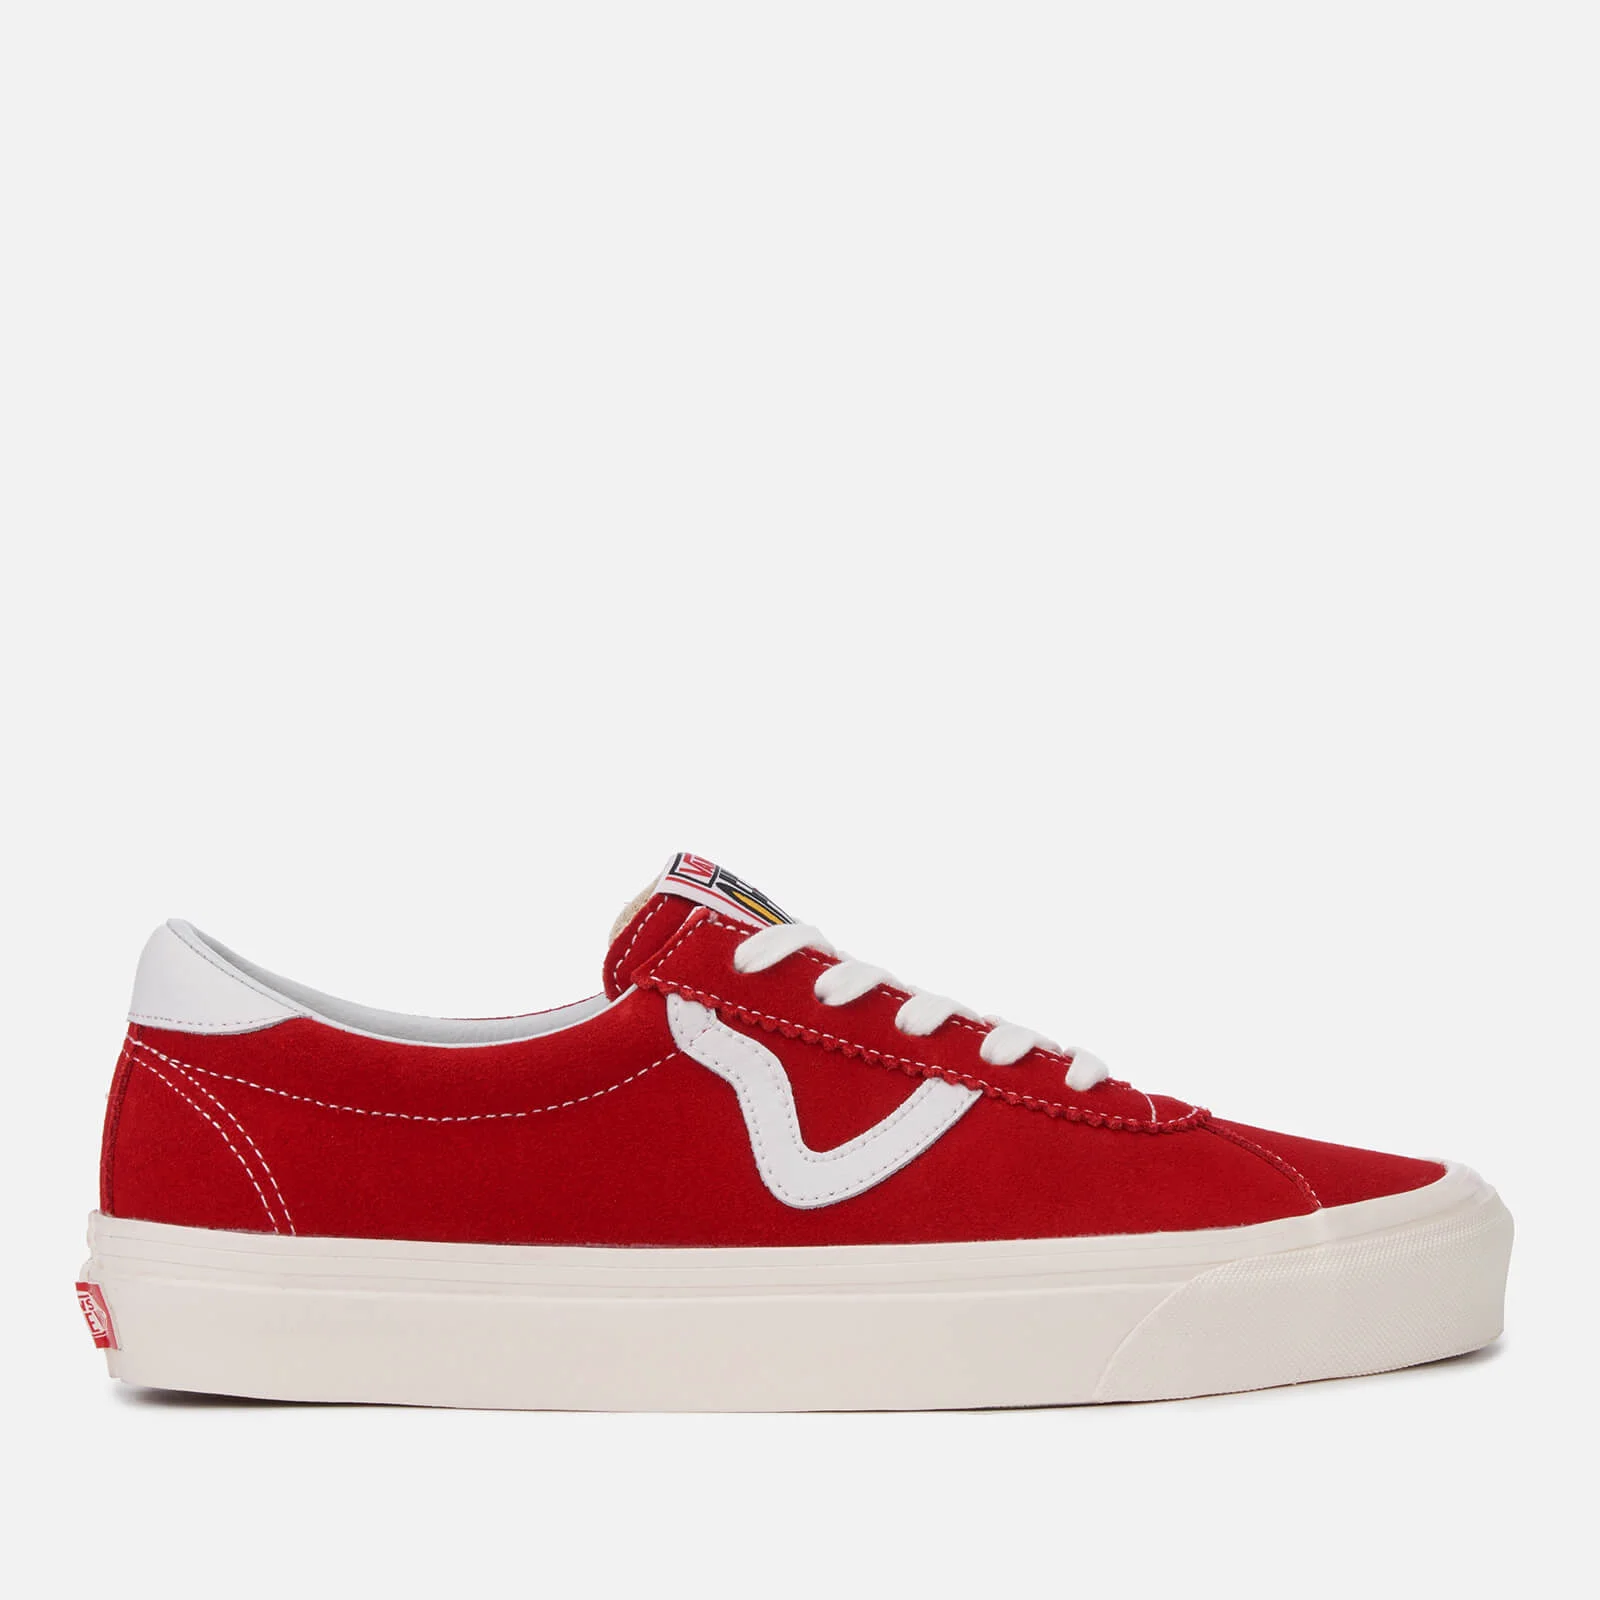 Vans Men's Anaheim Style 73 DX Trainers - OG Red/Suede Image 1